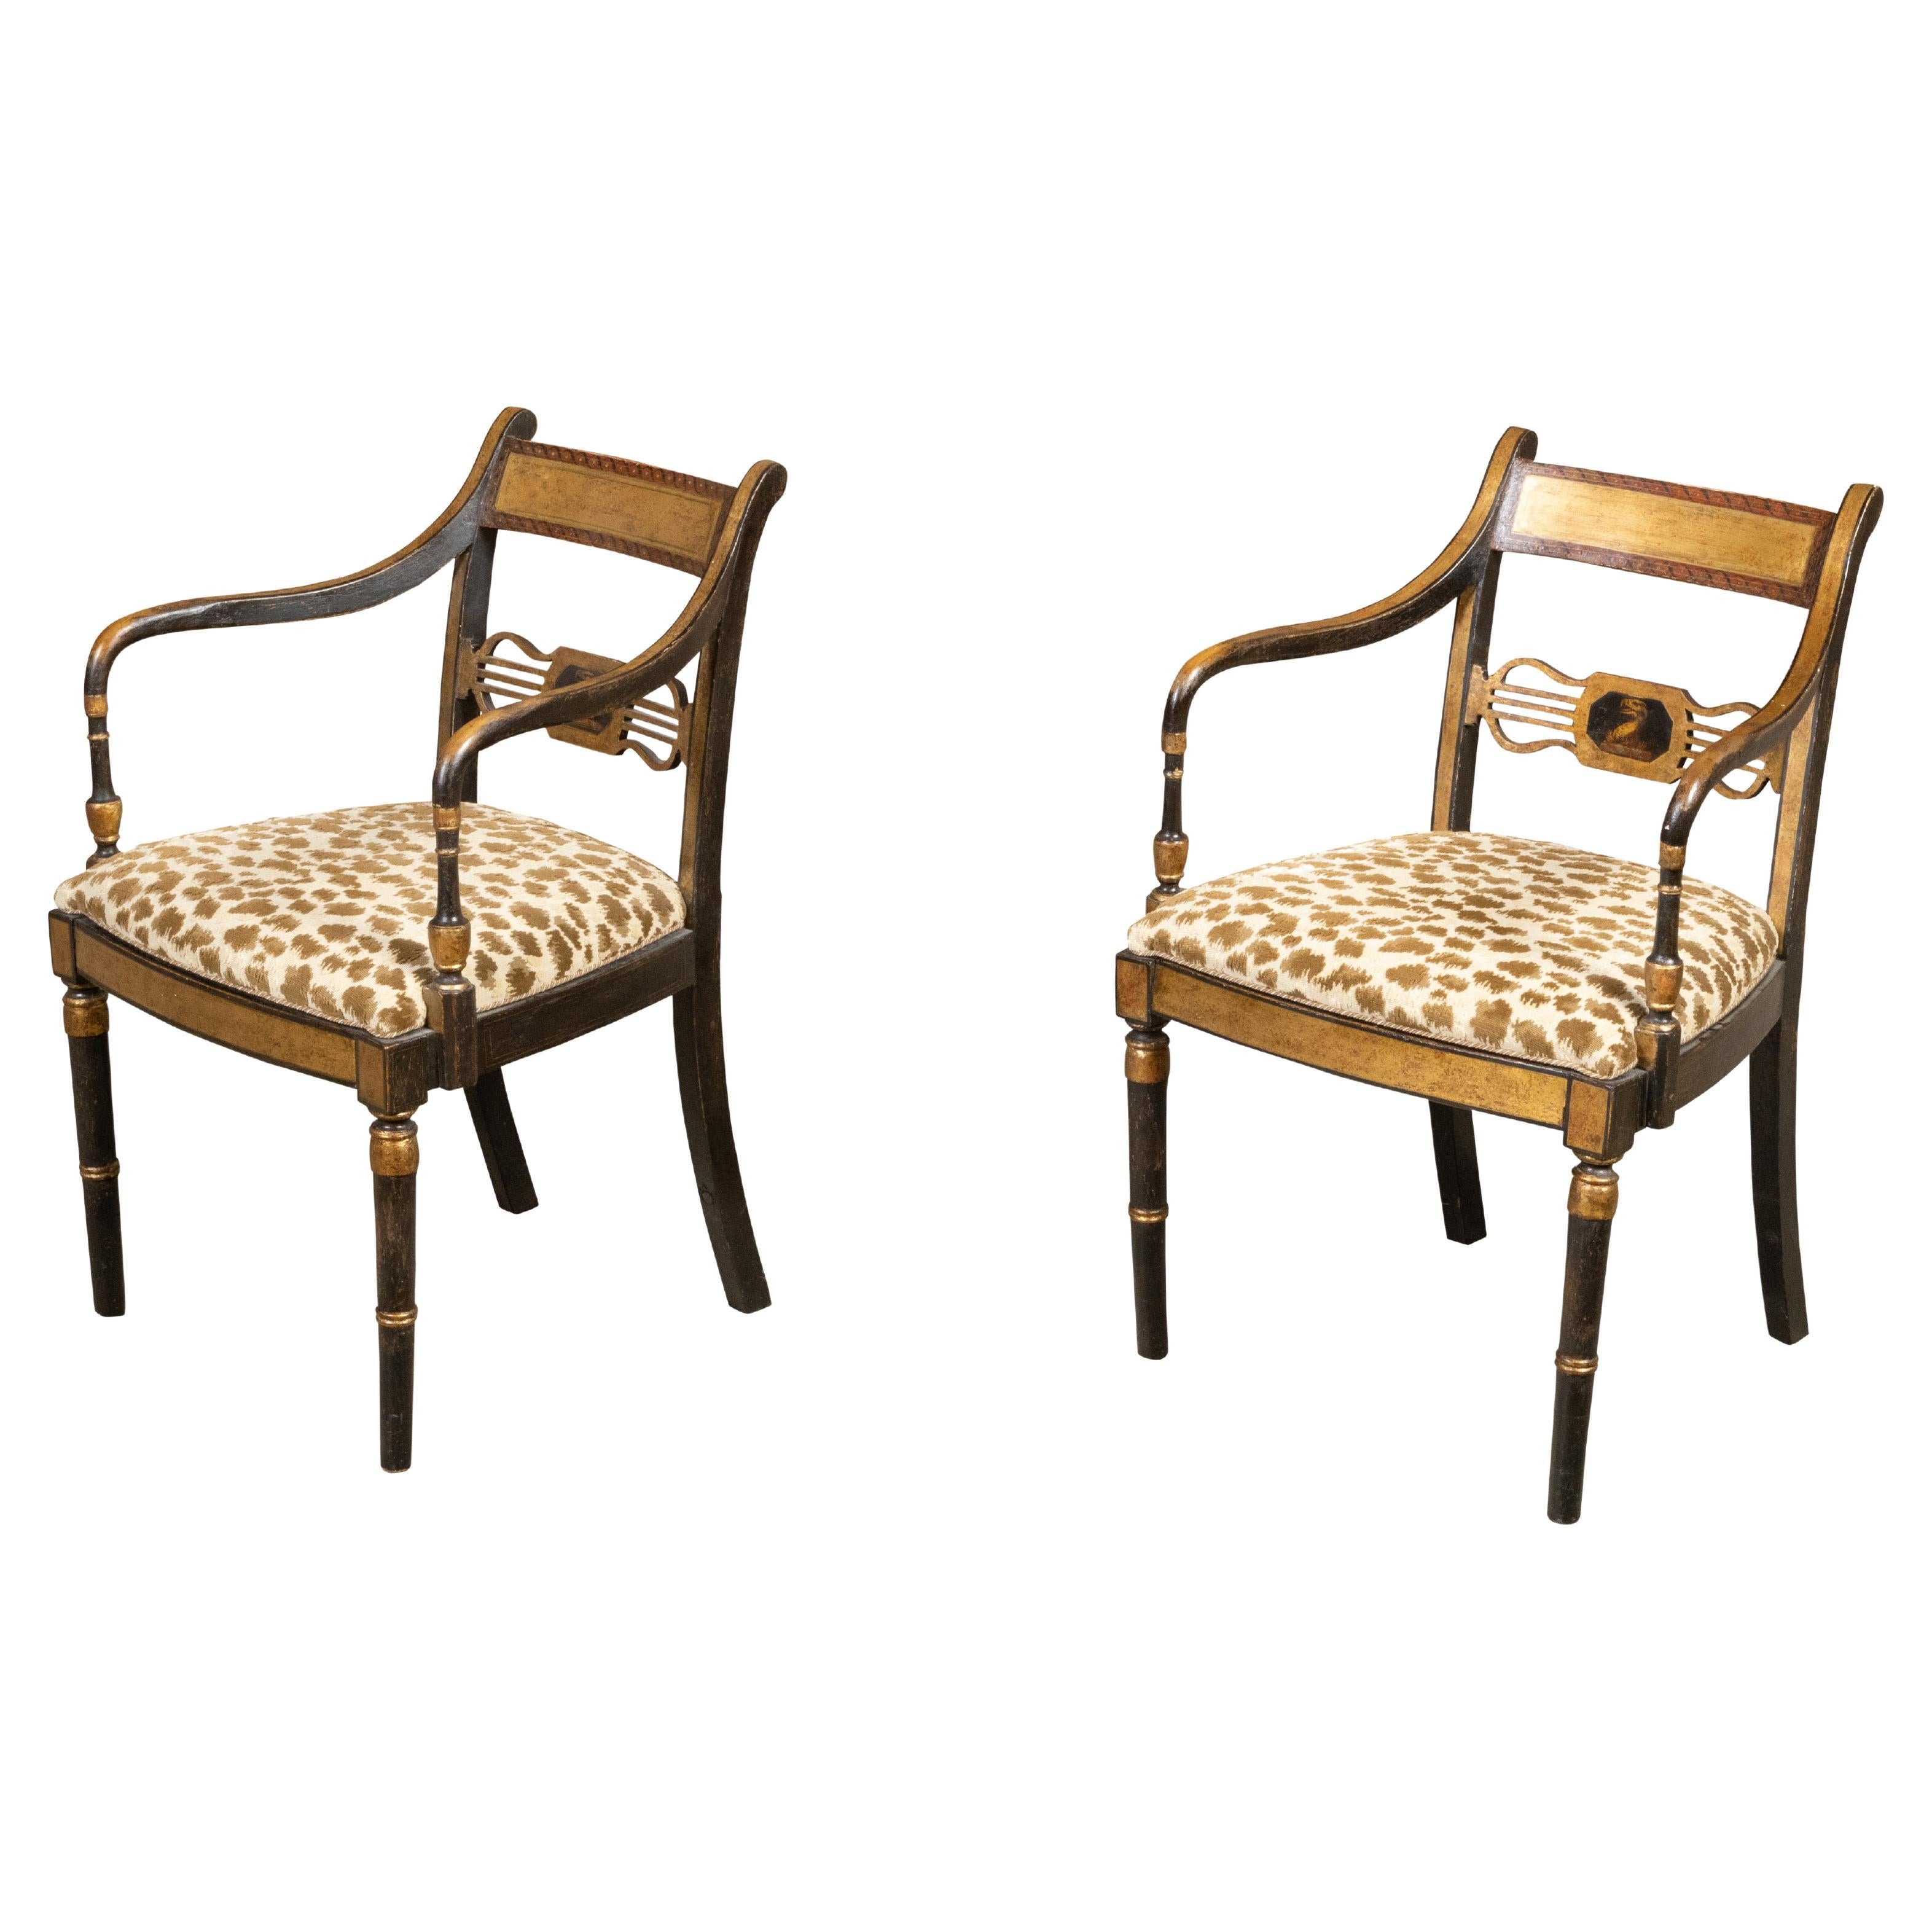 Pair of English Regency Period Early 19th Century Black and Gold Armchairs For Sale